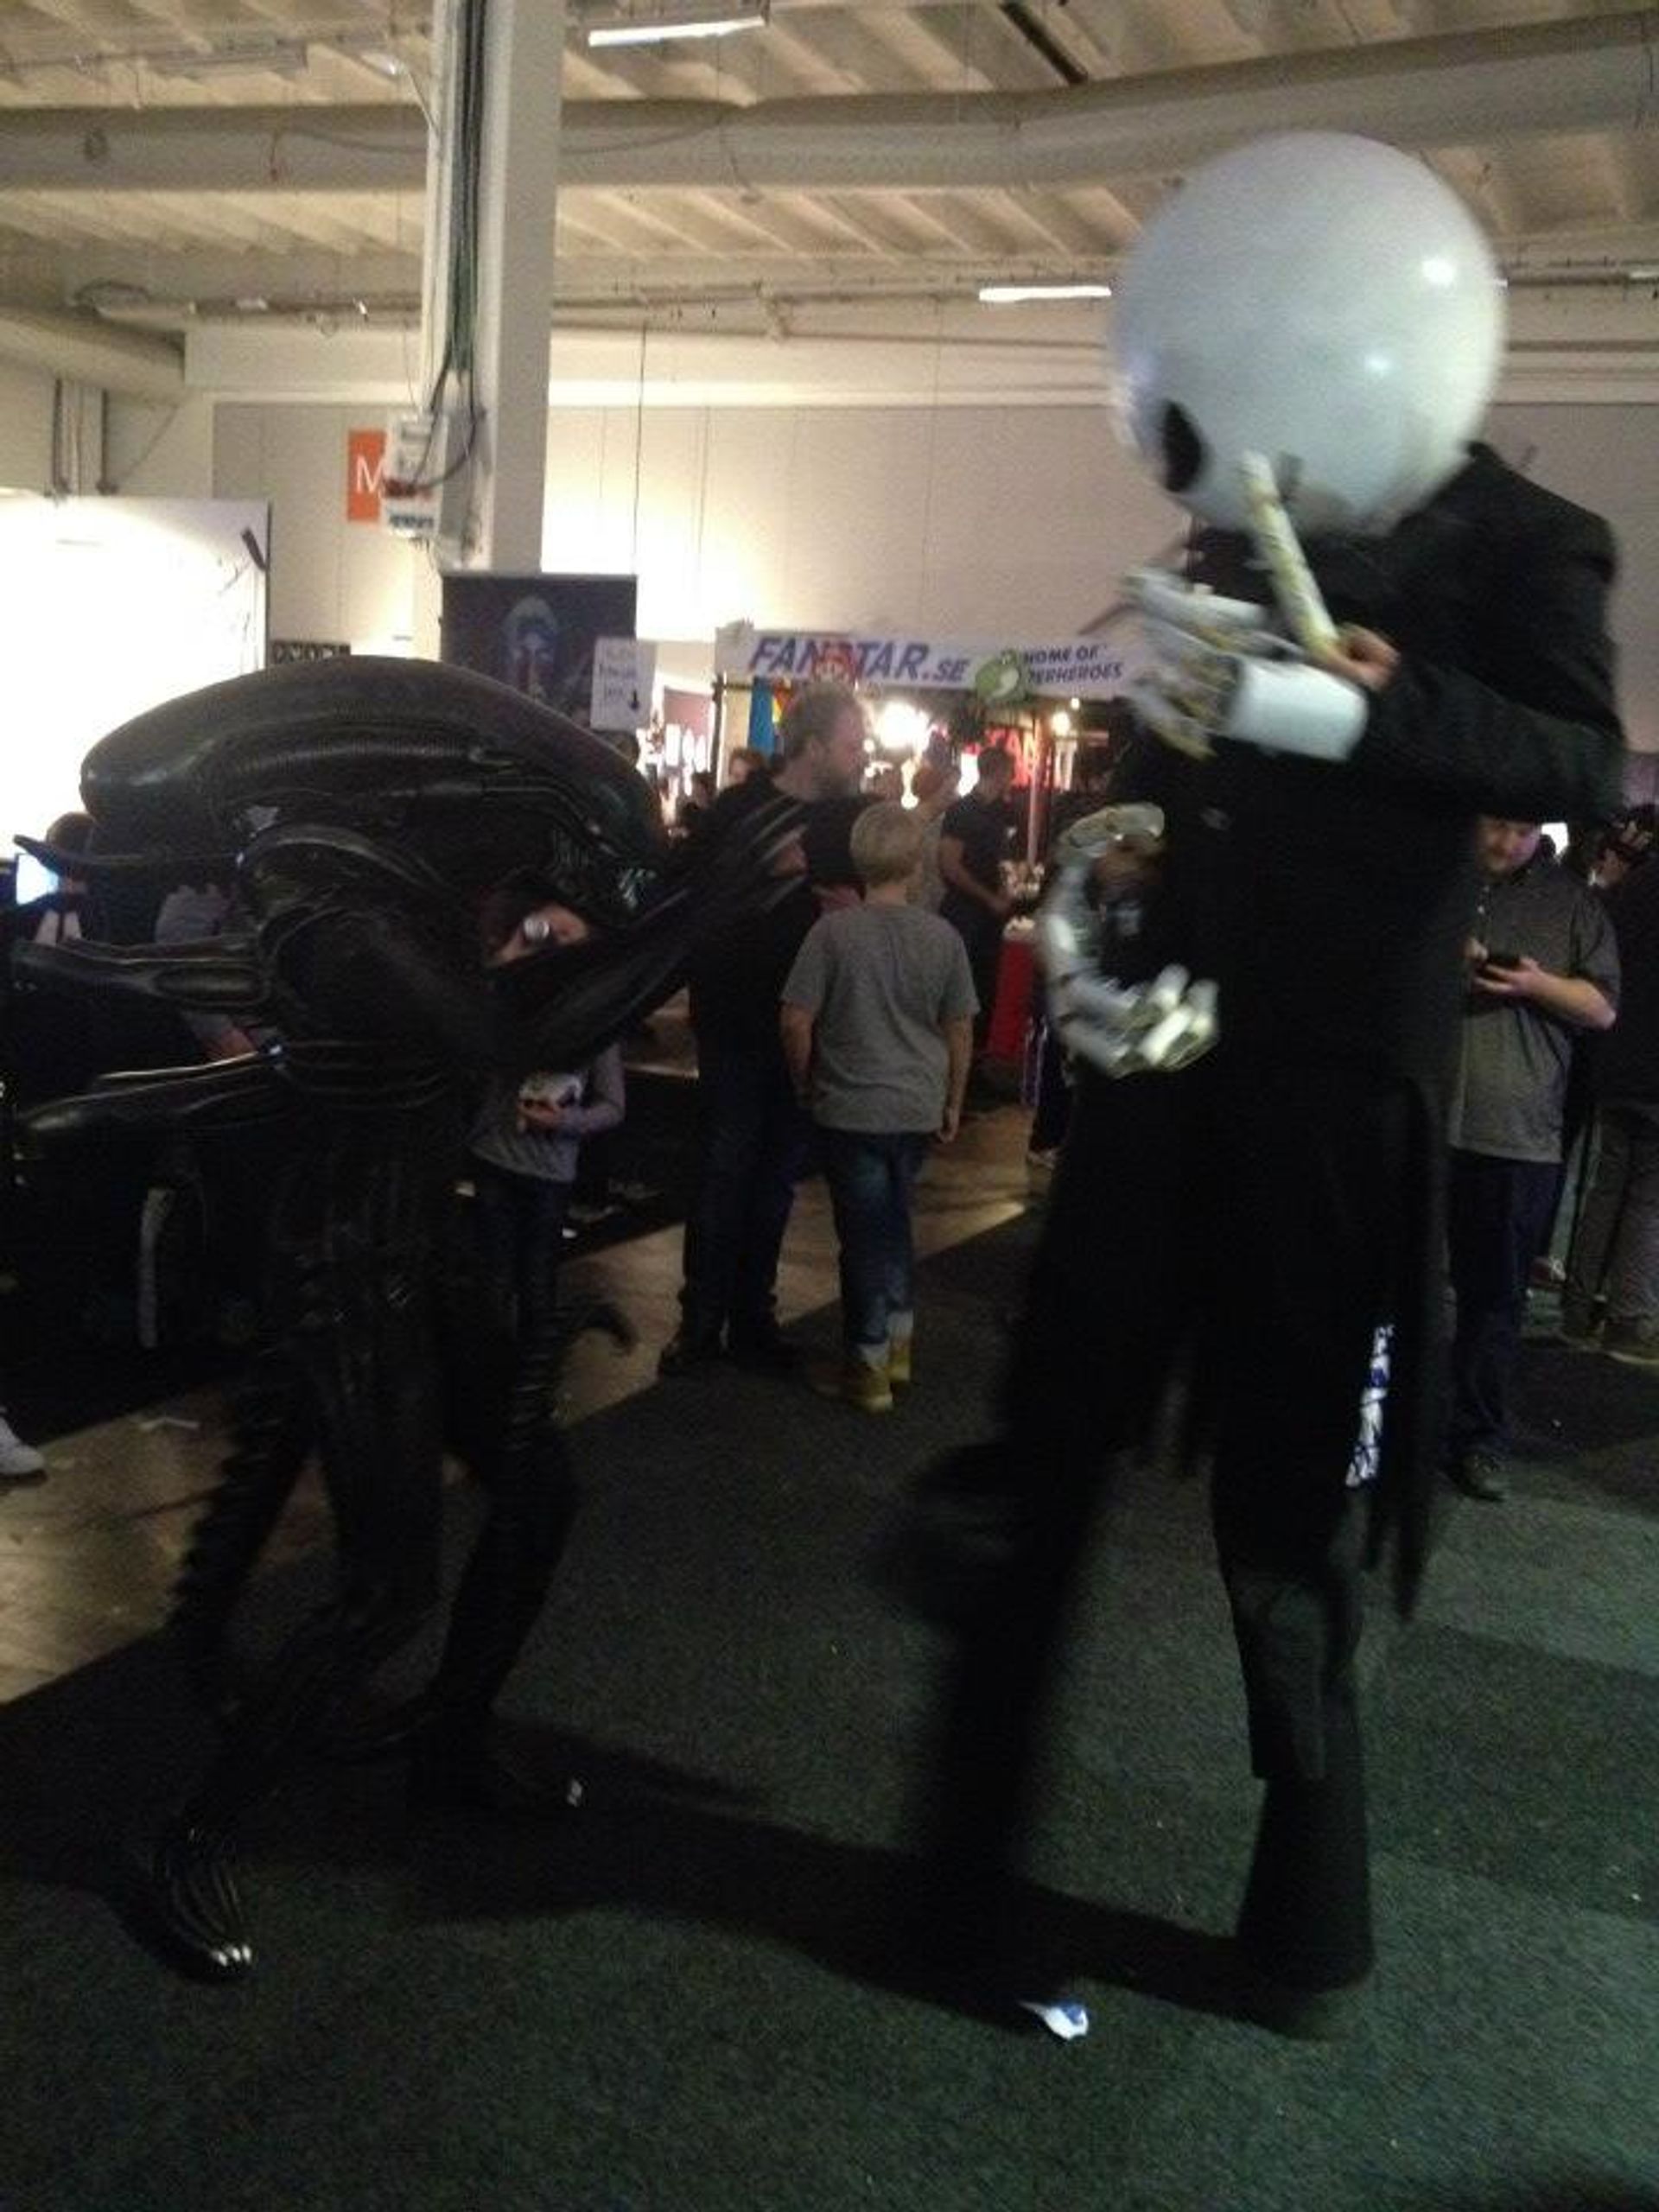 Watching a knife-fight between Jack Skellington and a Xenomorph